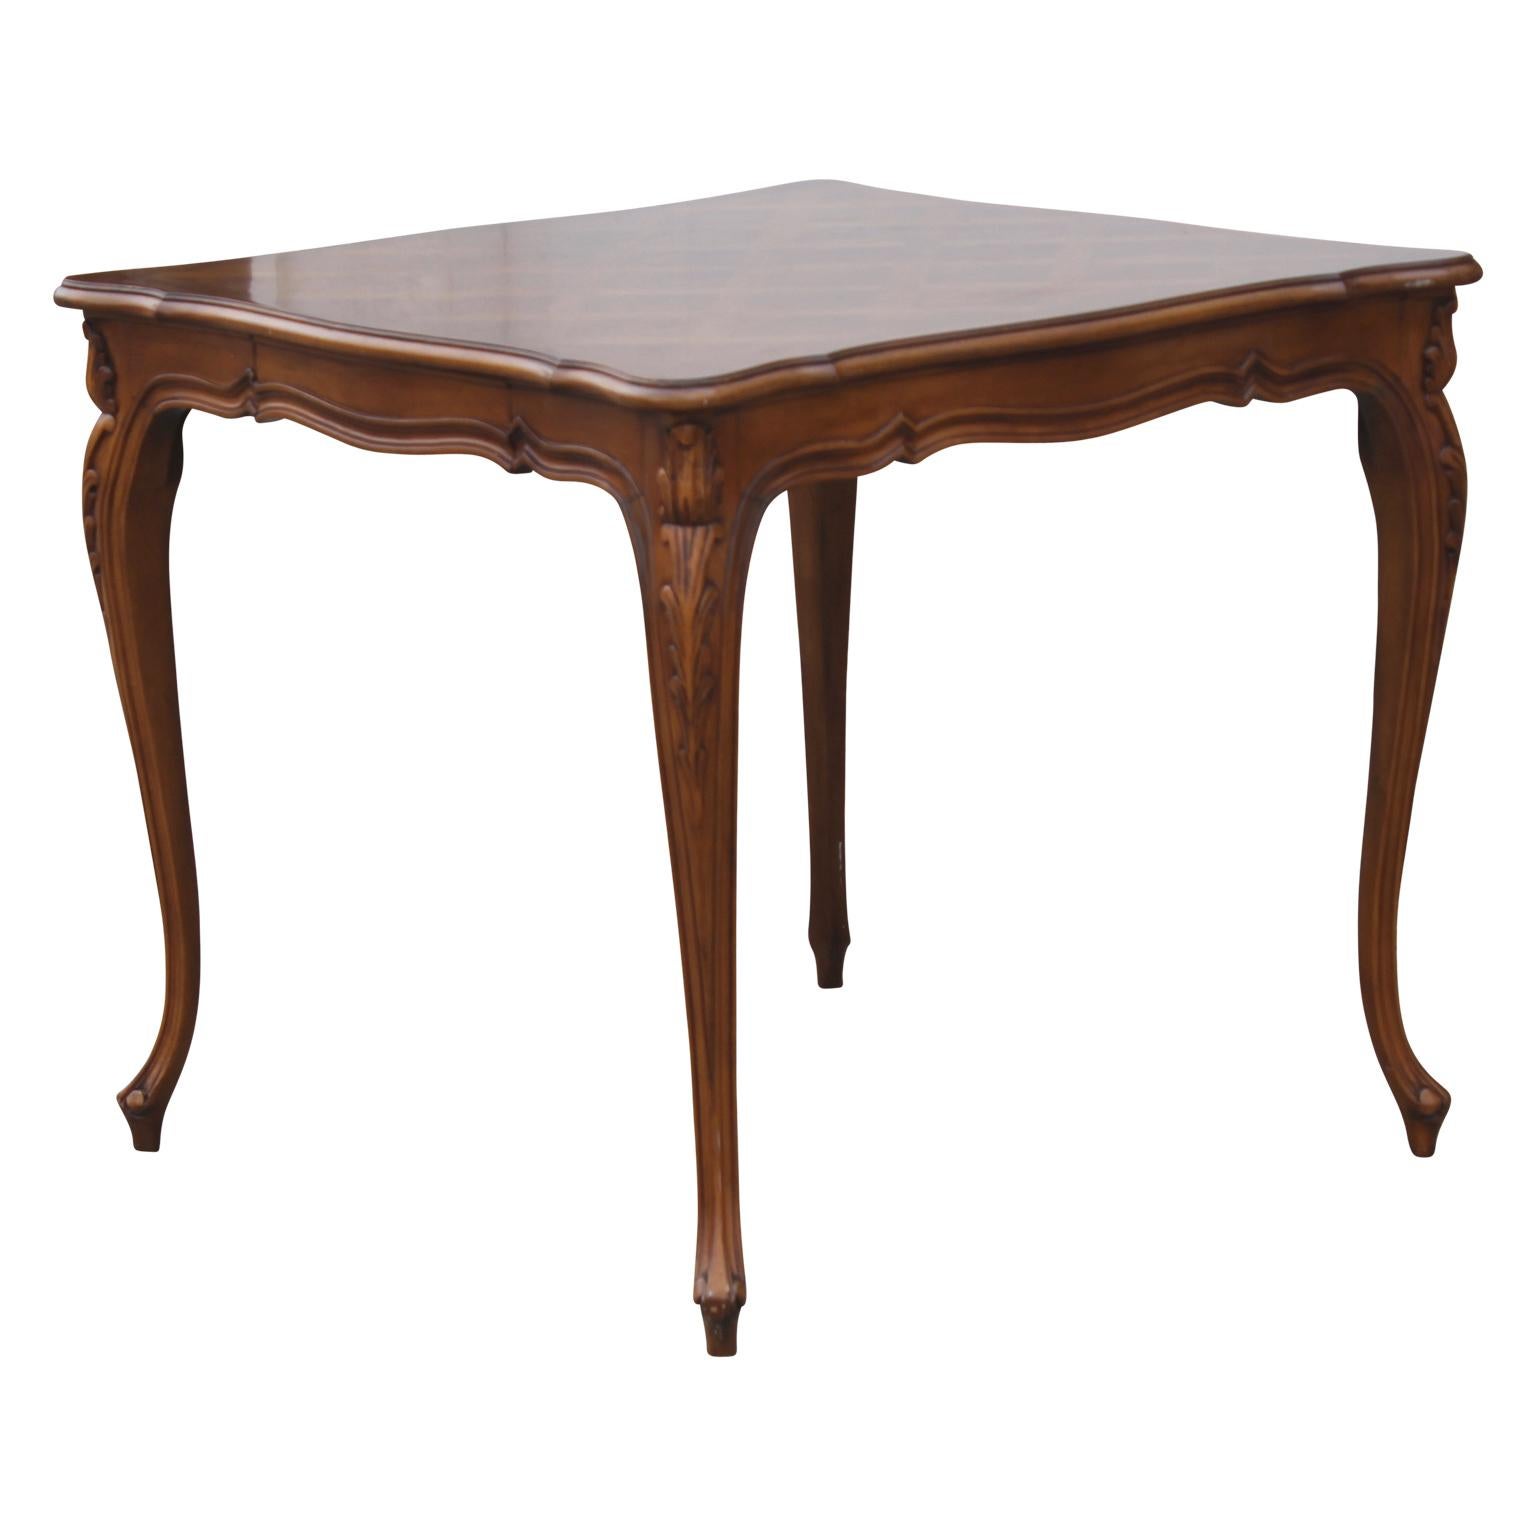 Lovely French Louis XV style walnut square game table by Karges Furniture. This piece features wonderfully detailed French style legs and lovely parquet tabletop.